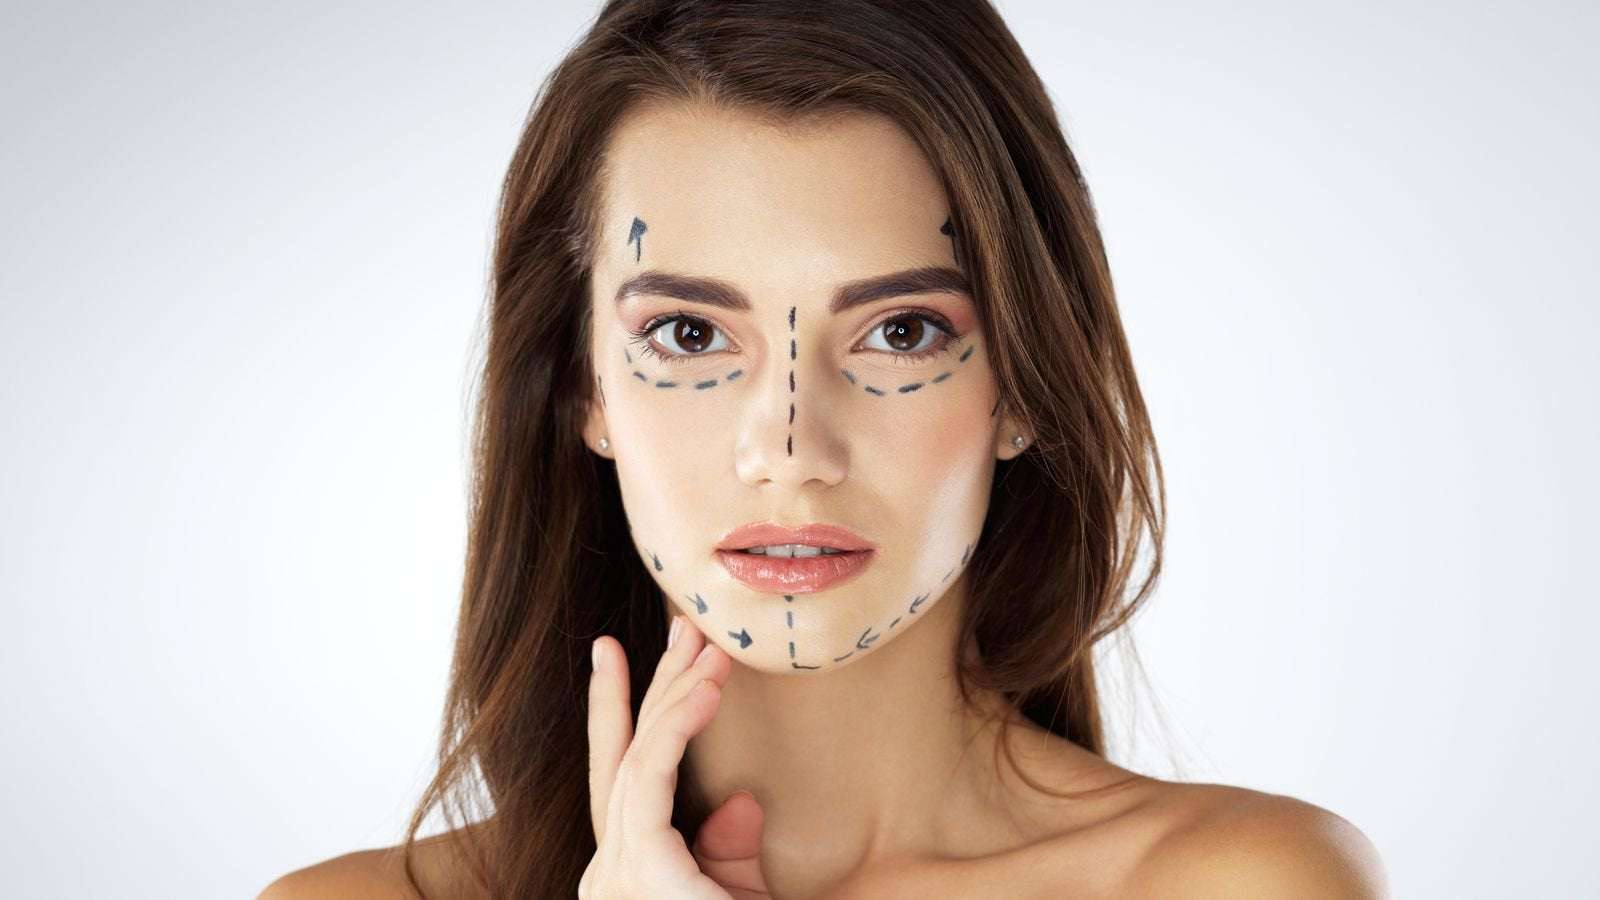 image for Cosmetic surgery adverts targeting teenagers banned